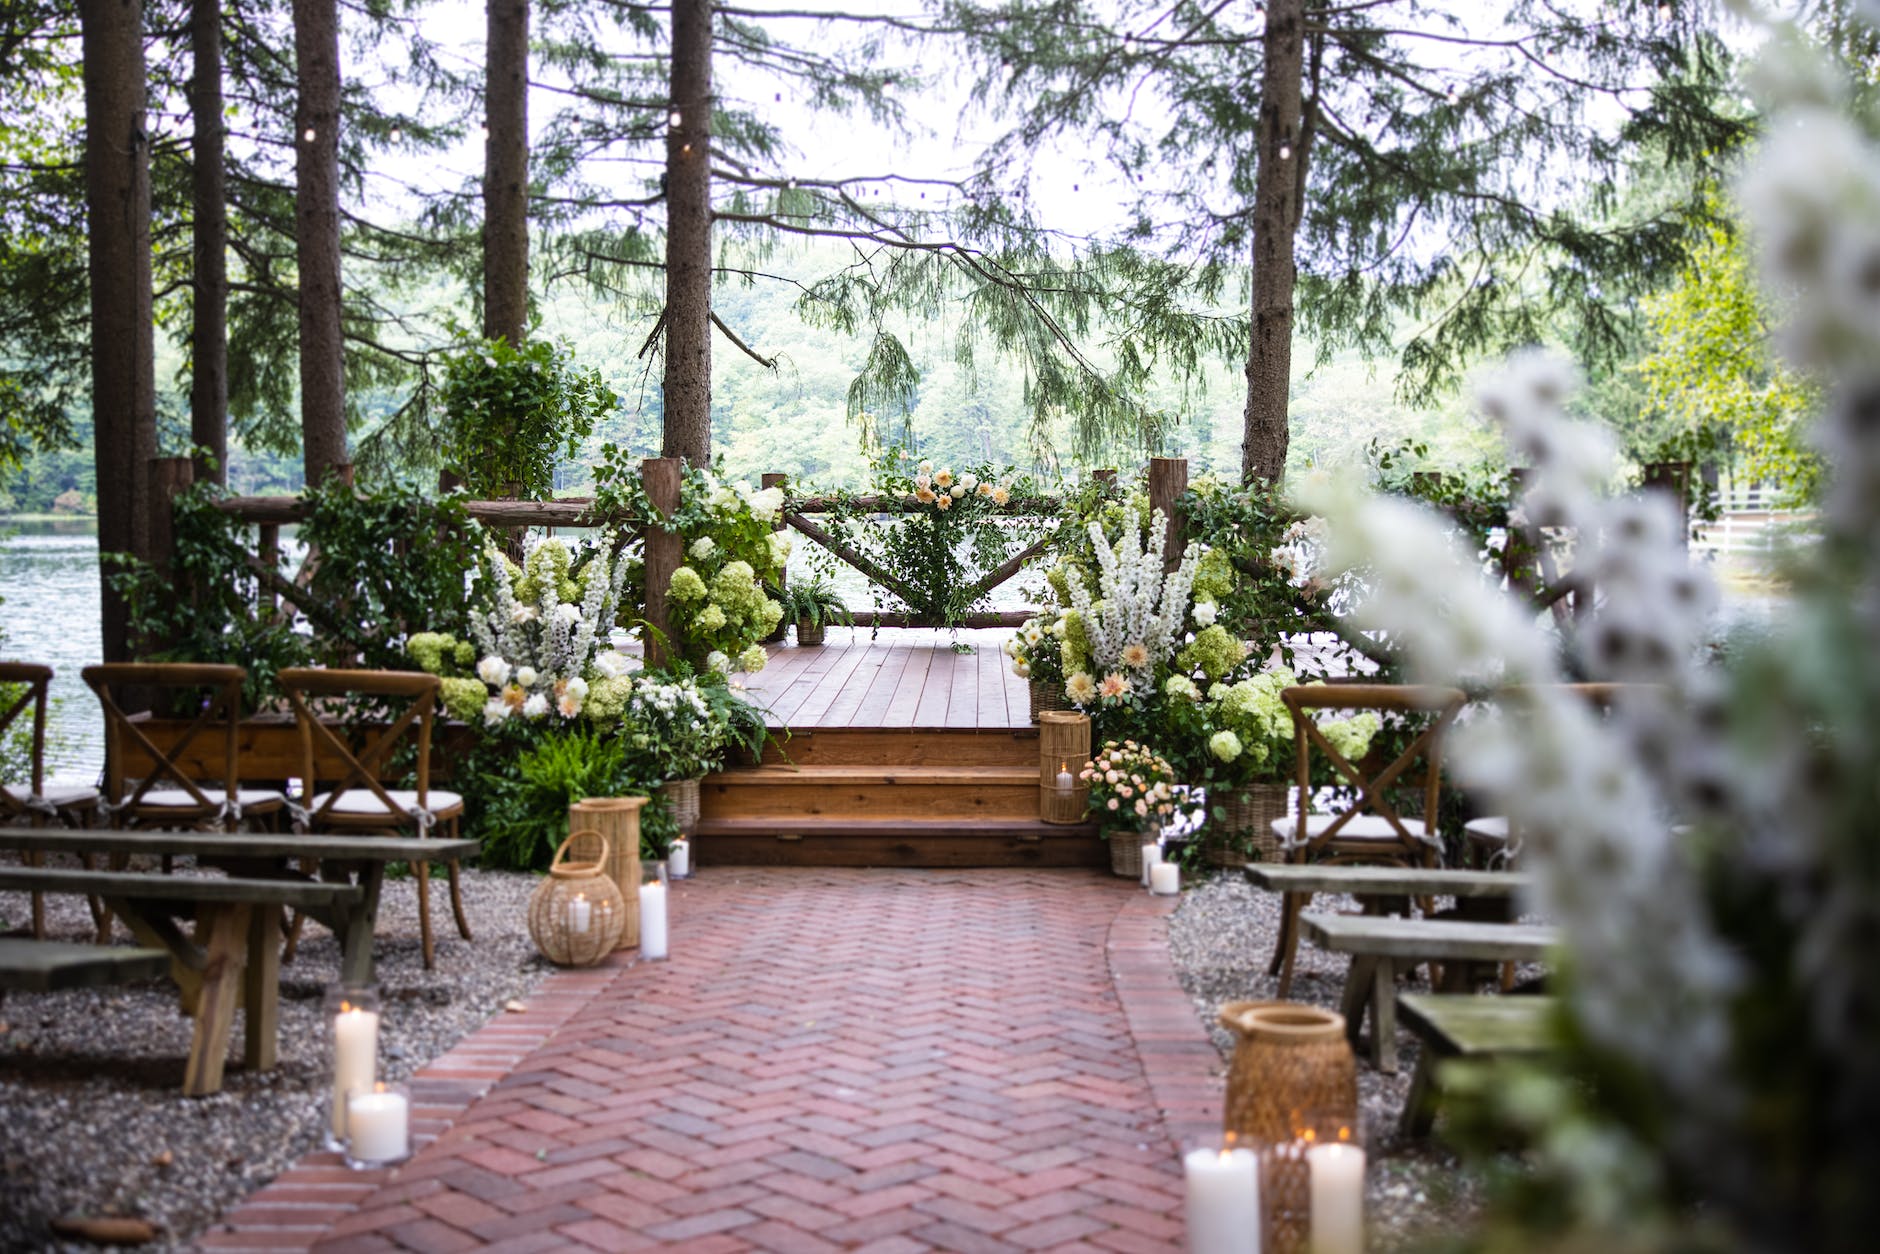 rustic style wedding venue between trees by the lake